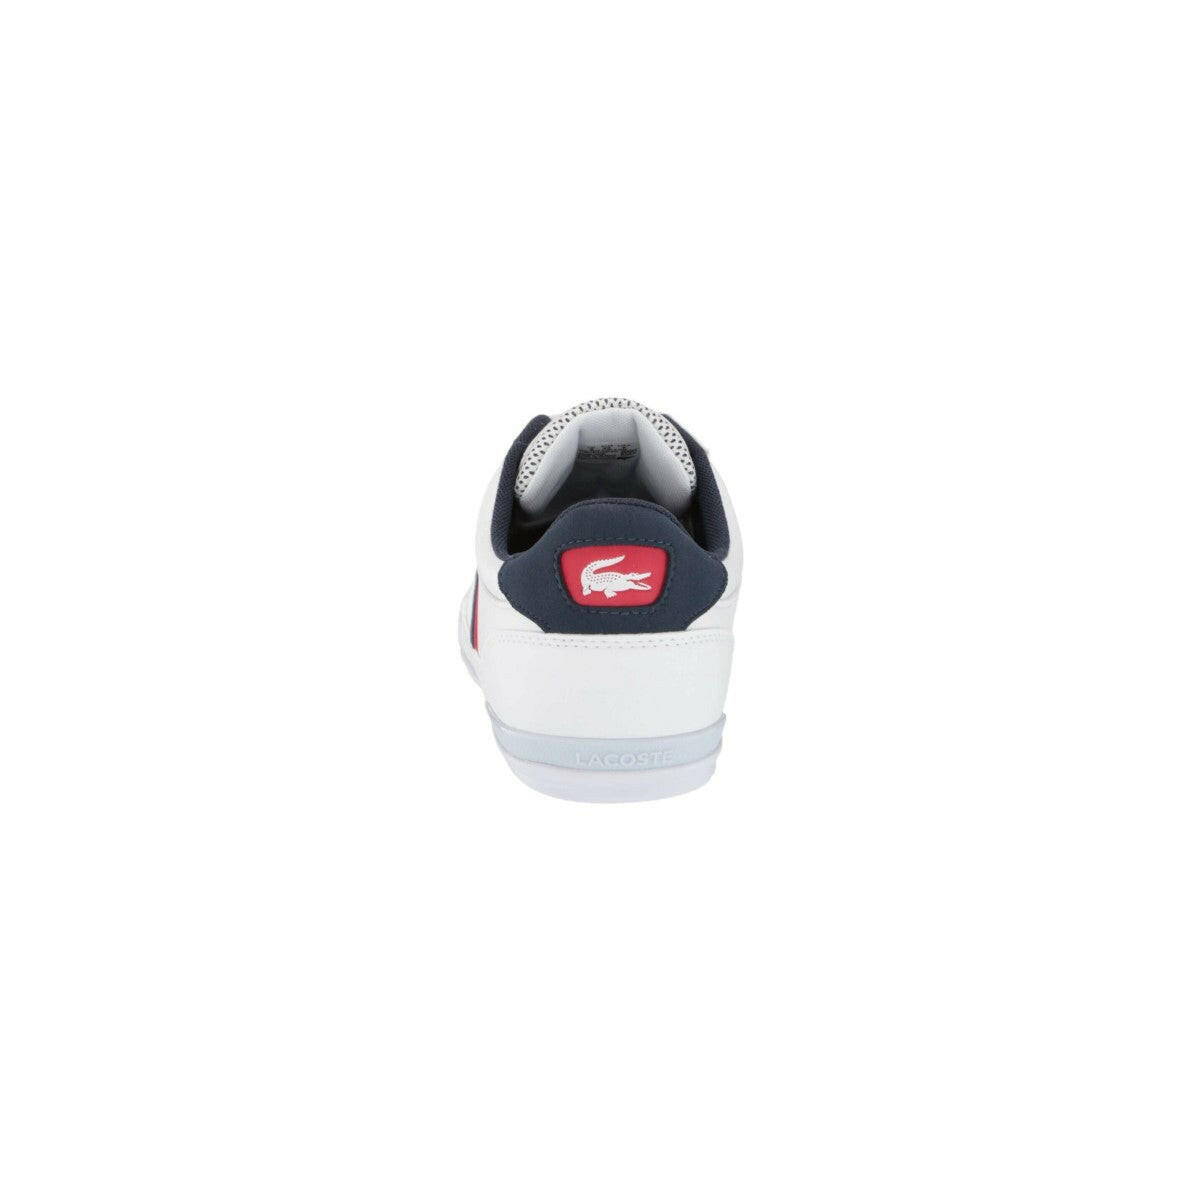 LACOSTE 7-40CMA0067407 CHAYMON 120 7 MN'S (Medium) White/Navy/Red Synthetic & Textile Lifestyle Shoes - GENUINE AUTHENTIC BRAND LLC  